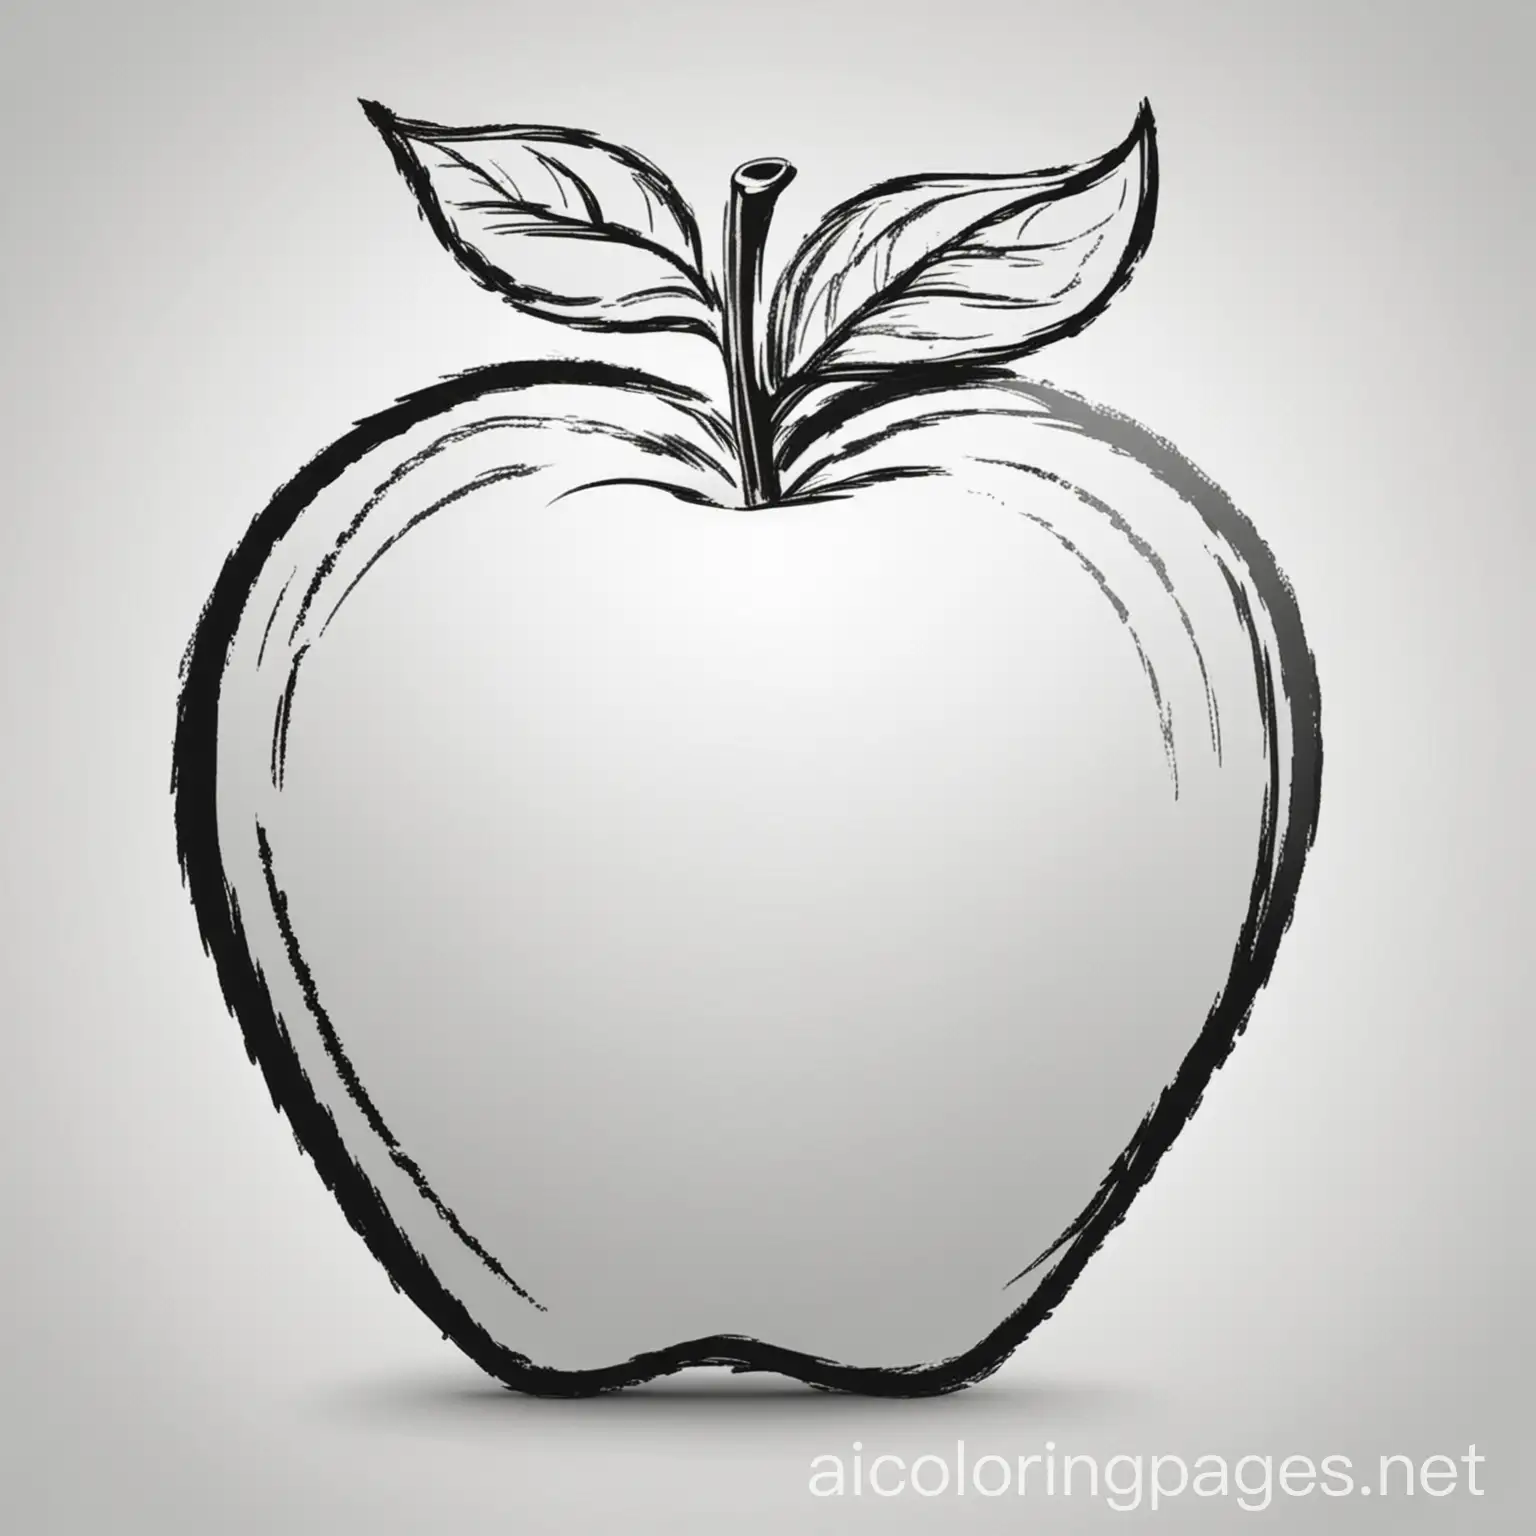 Apple-Coloring-Page-for-Children-Simple-Line-Art-on-White-Background